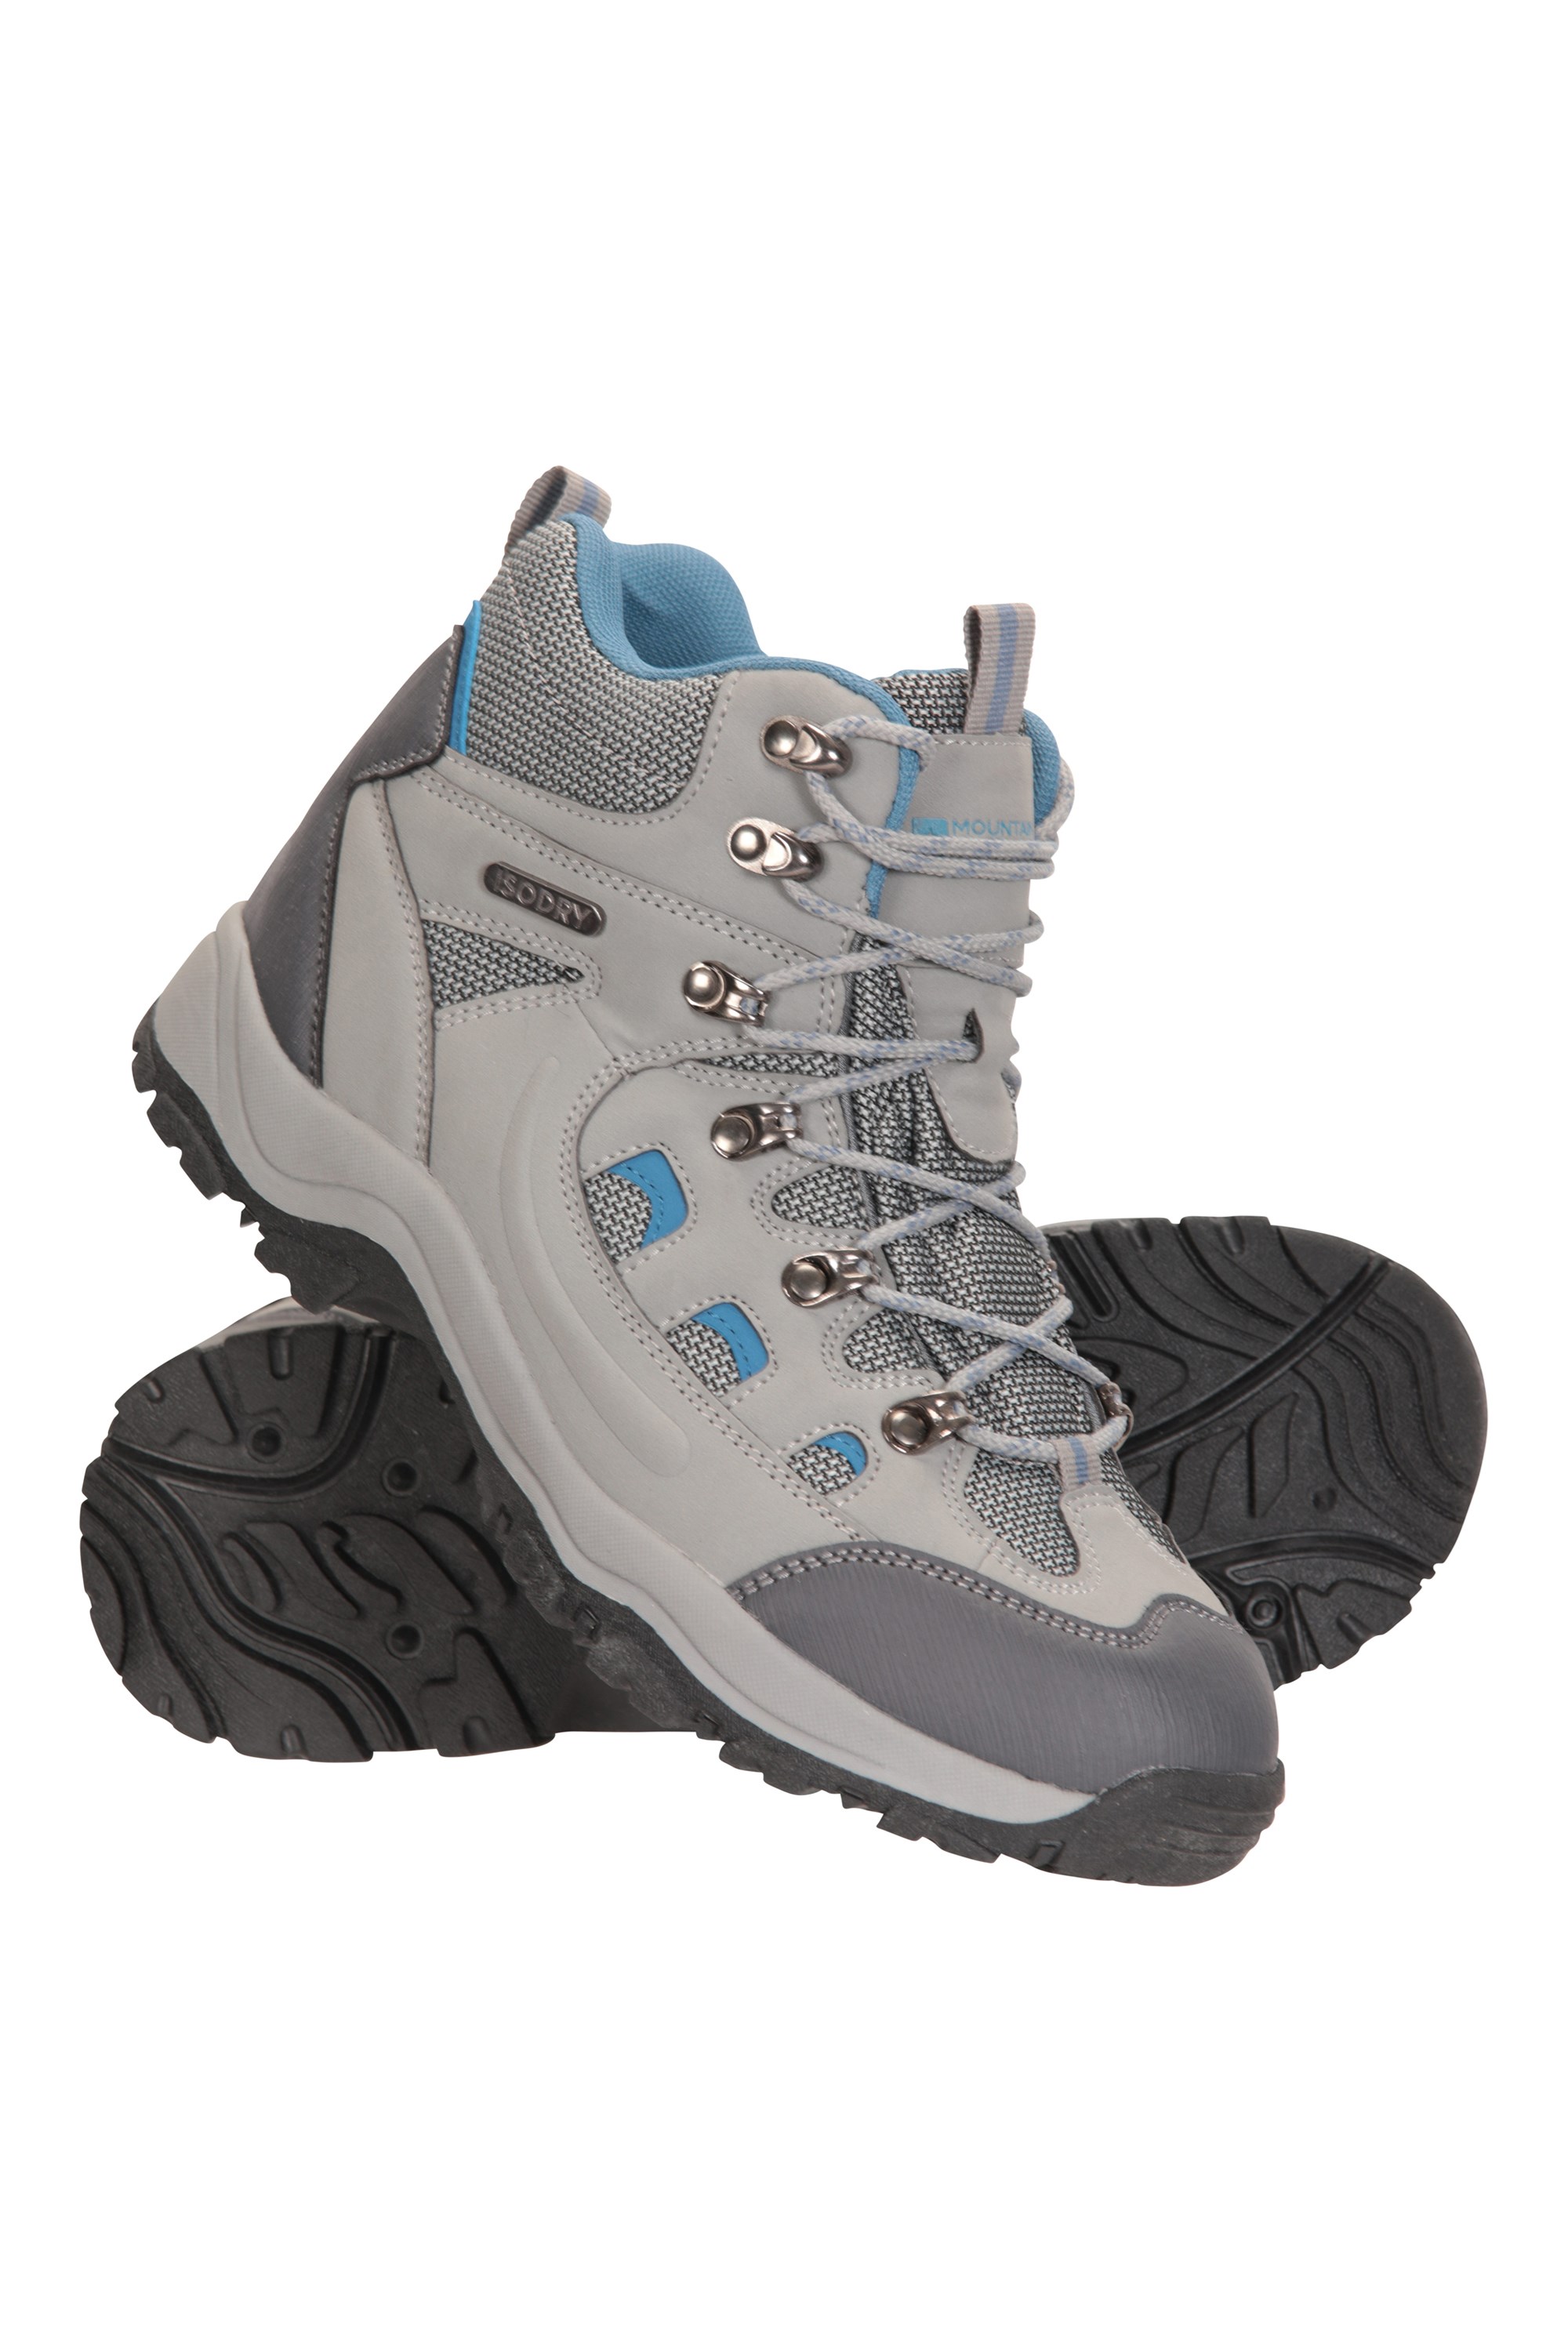 synthetic waterproof boots